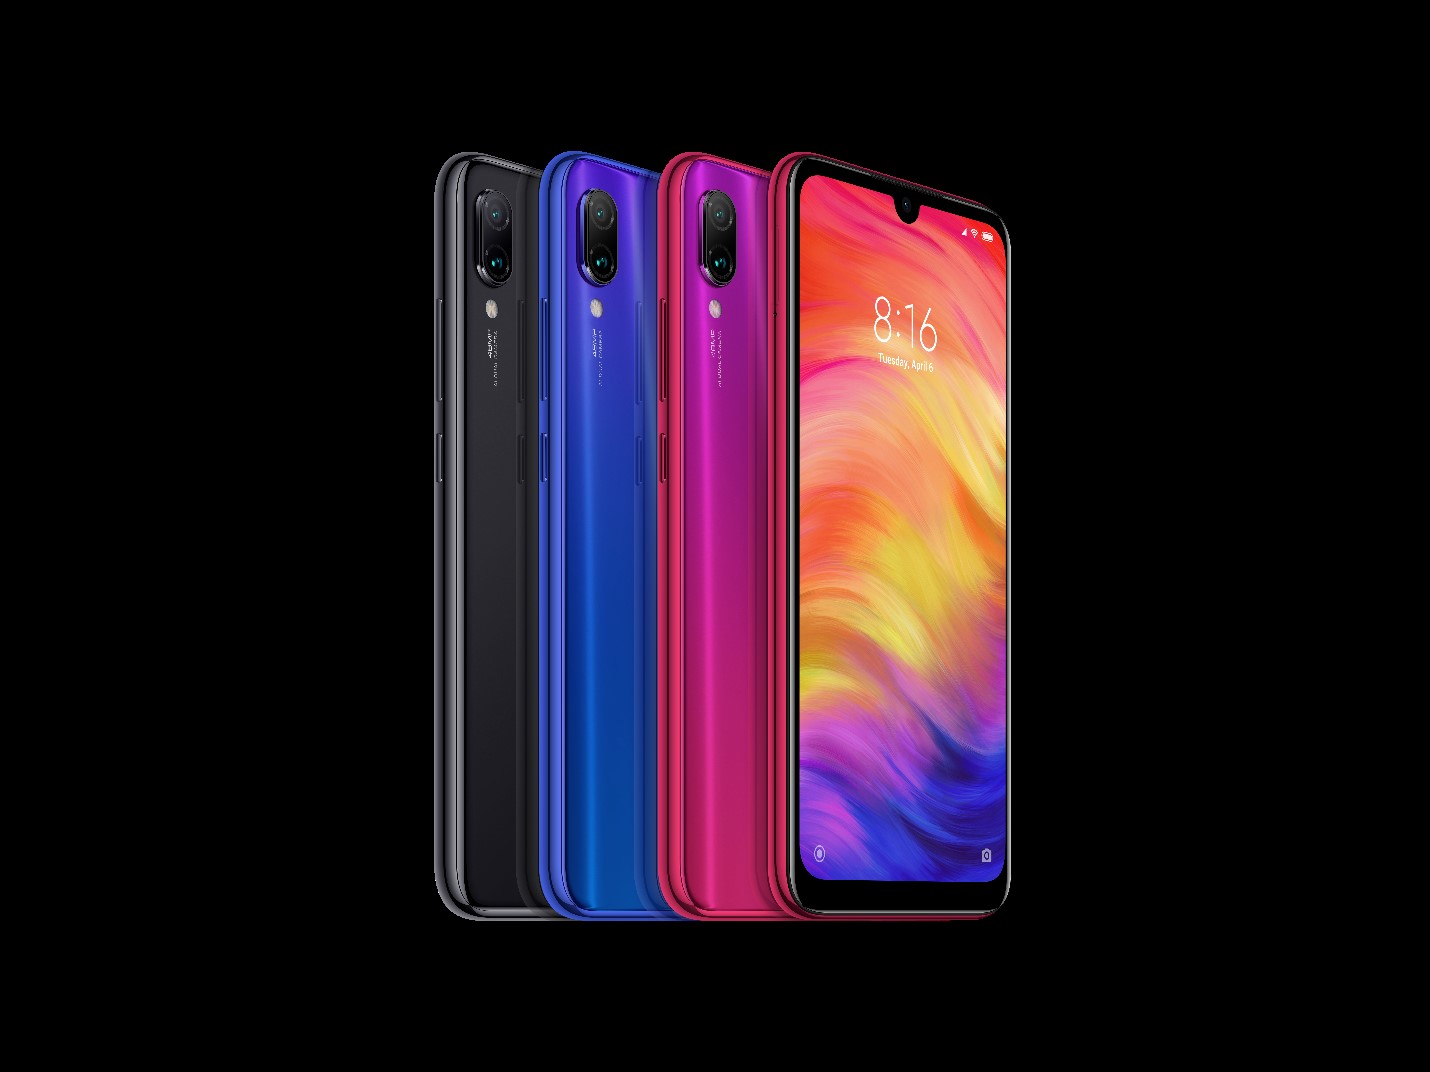 Xiaomi Officially Launches the Redmi Note 7 in Pakistan